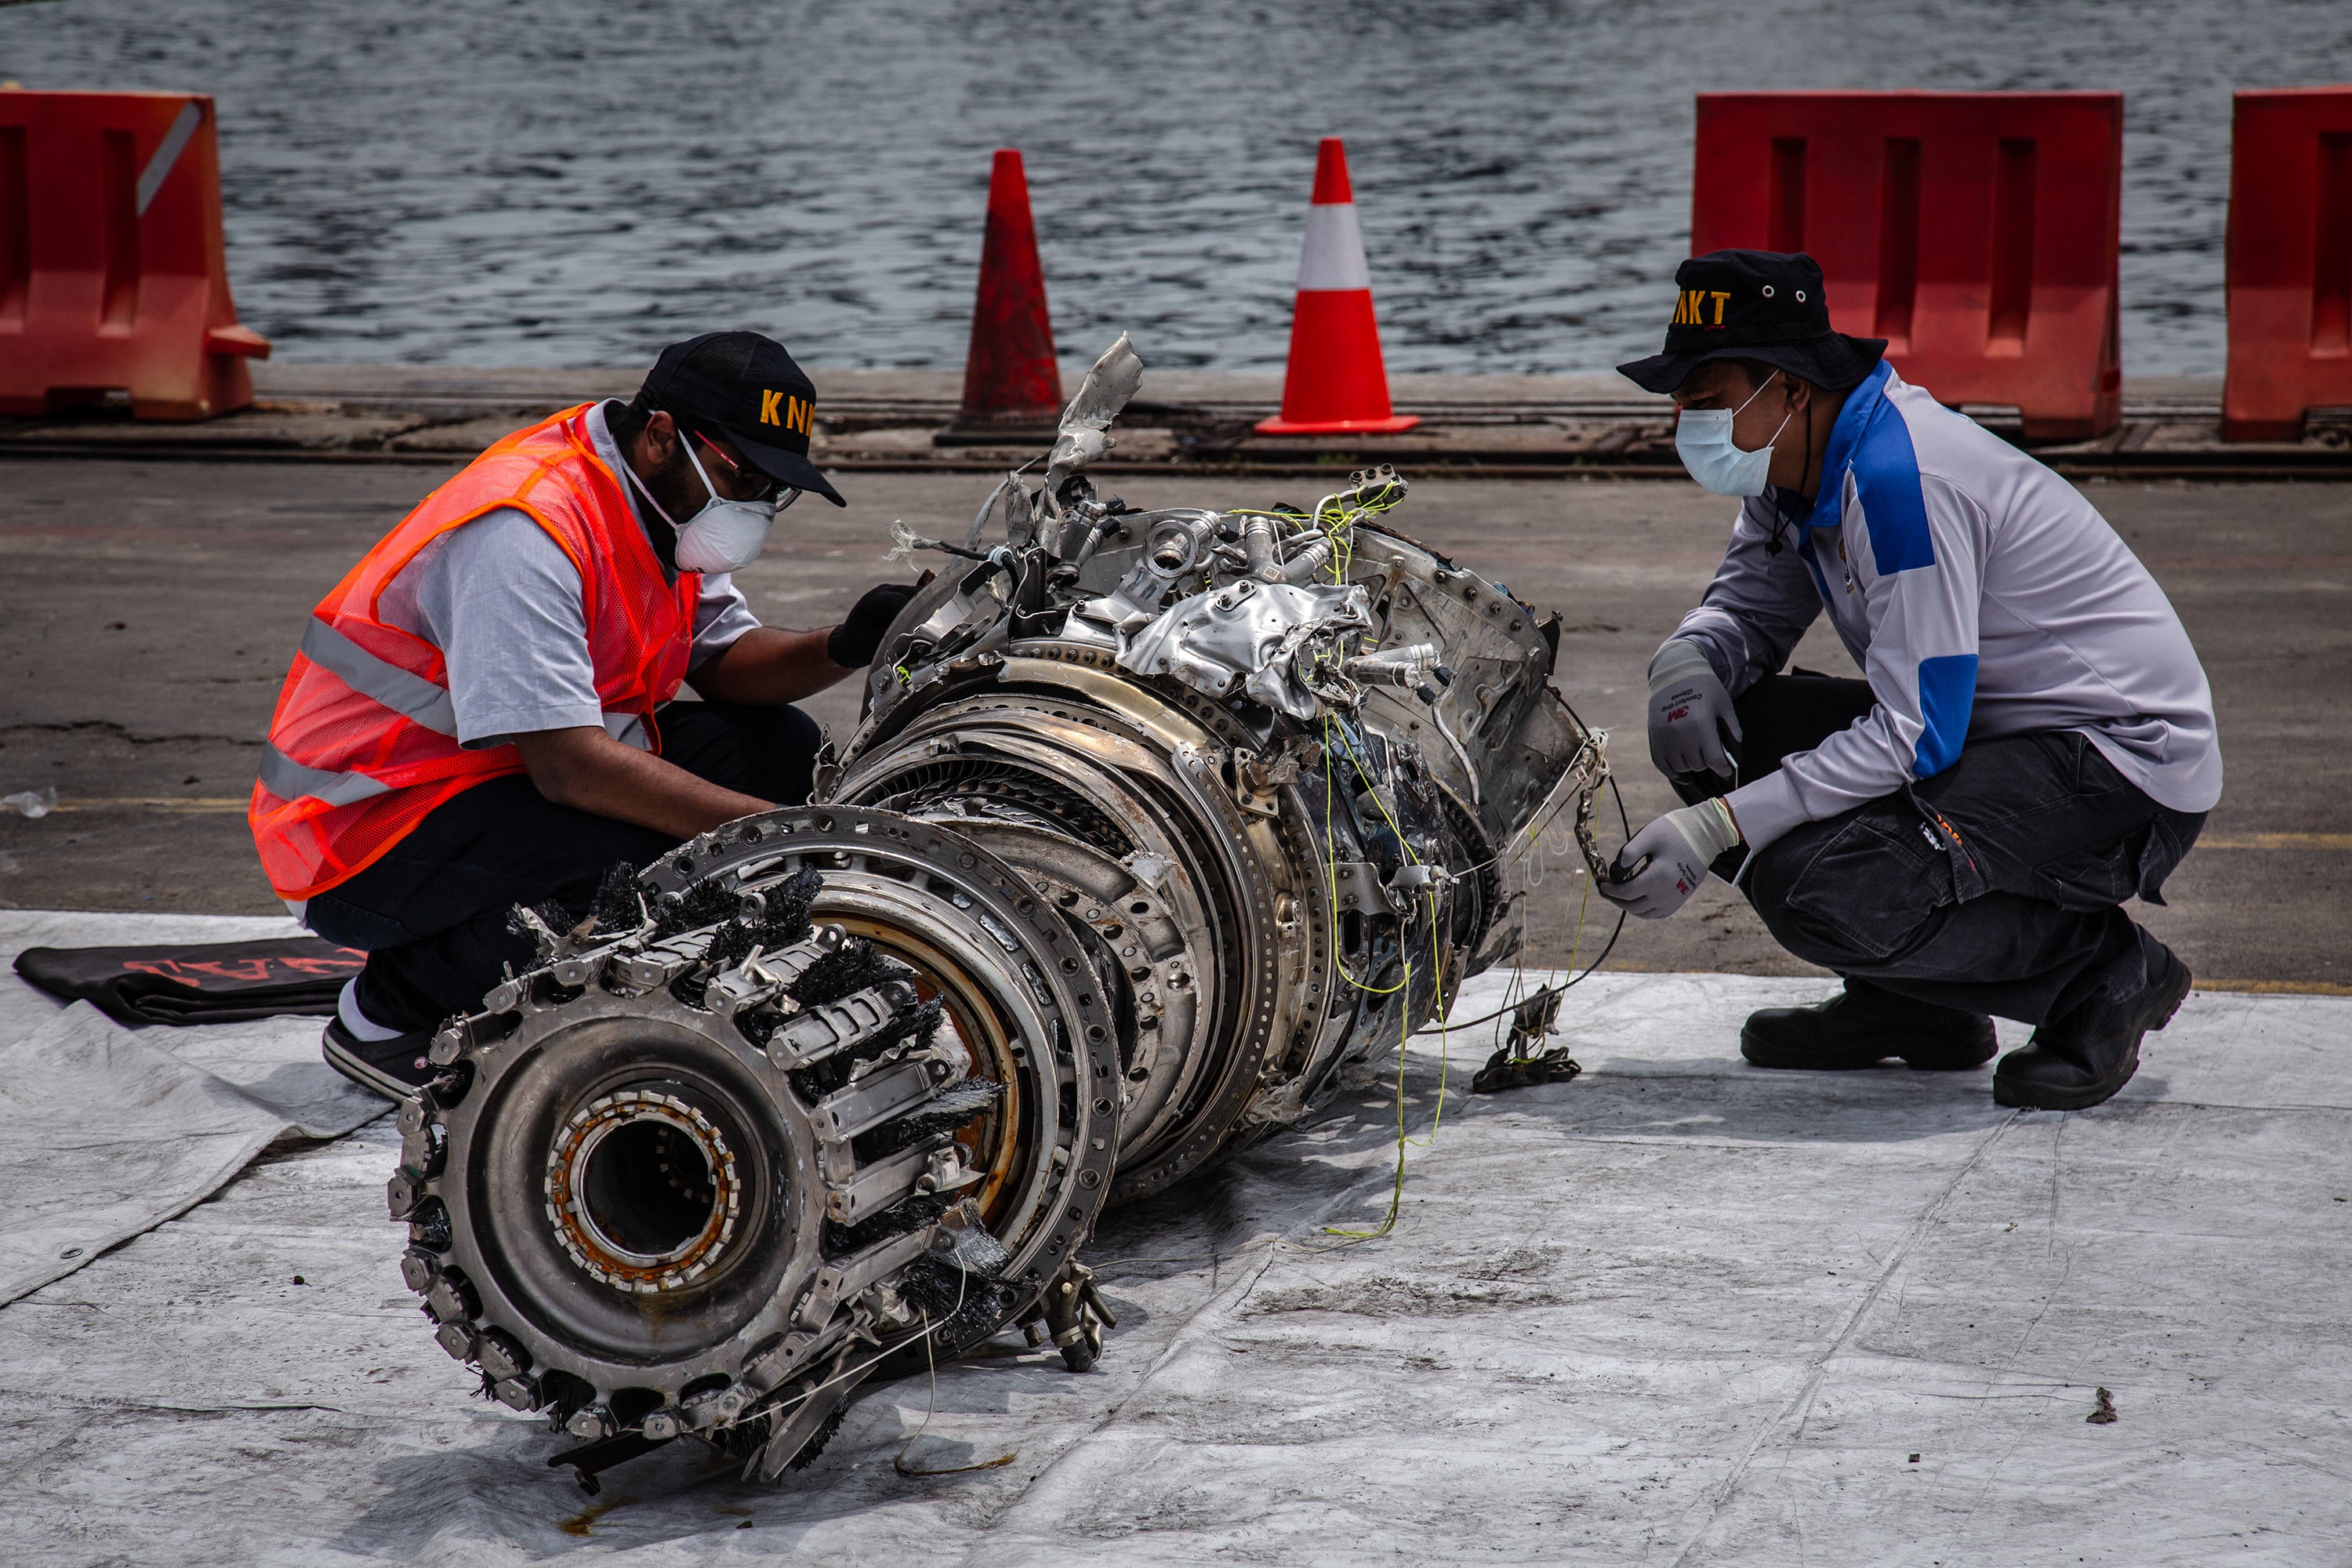 Indonesian investigators inspect the wreckage of an engine from the fatal Lion Air Flight JT 610 recovered from the sea at the Tanjung Priok in November 2018